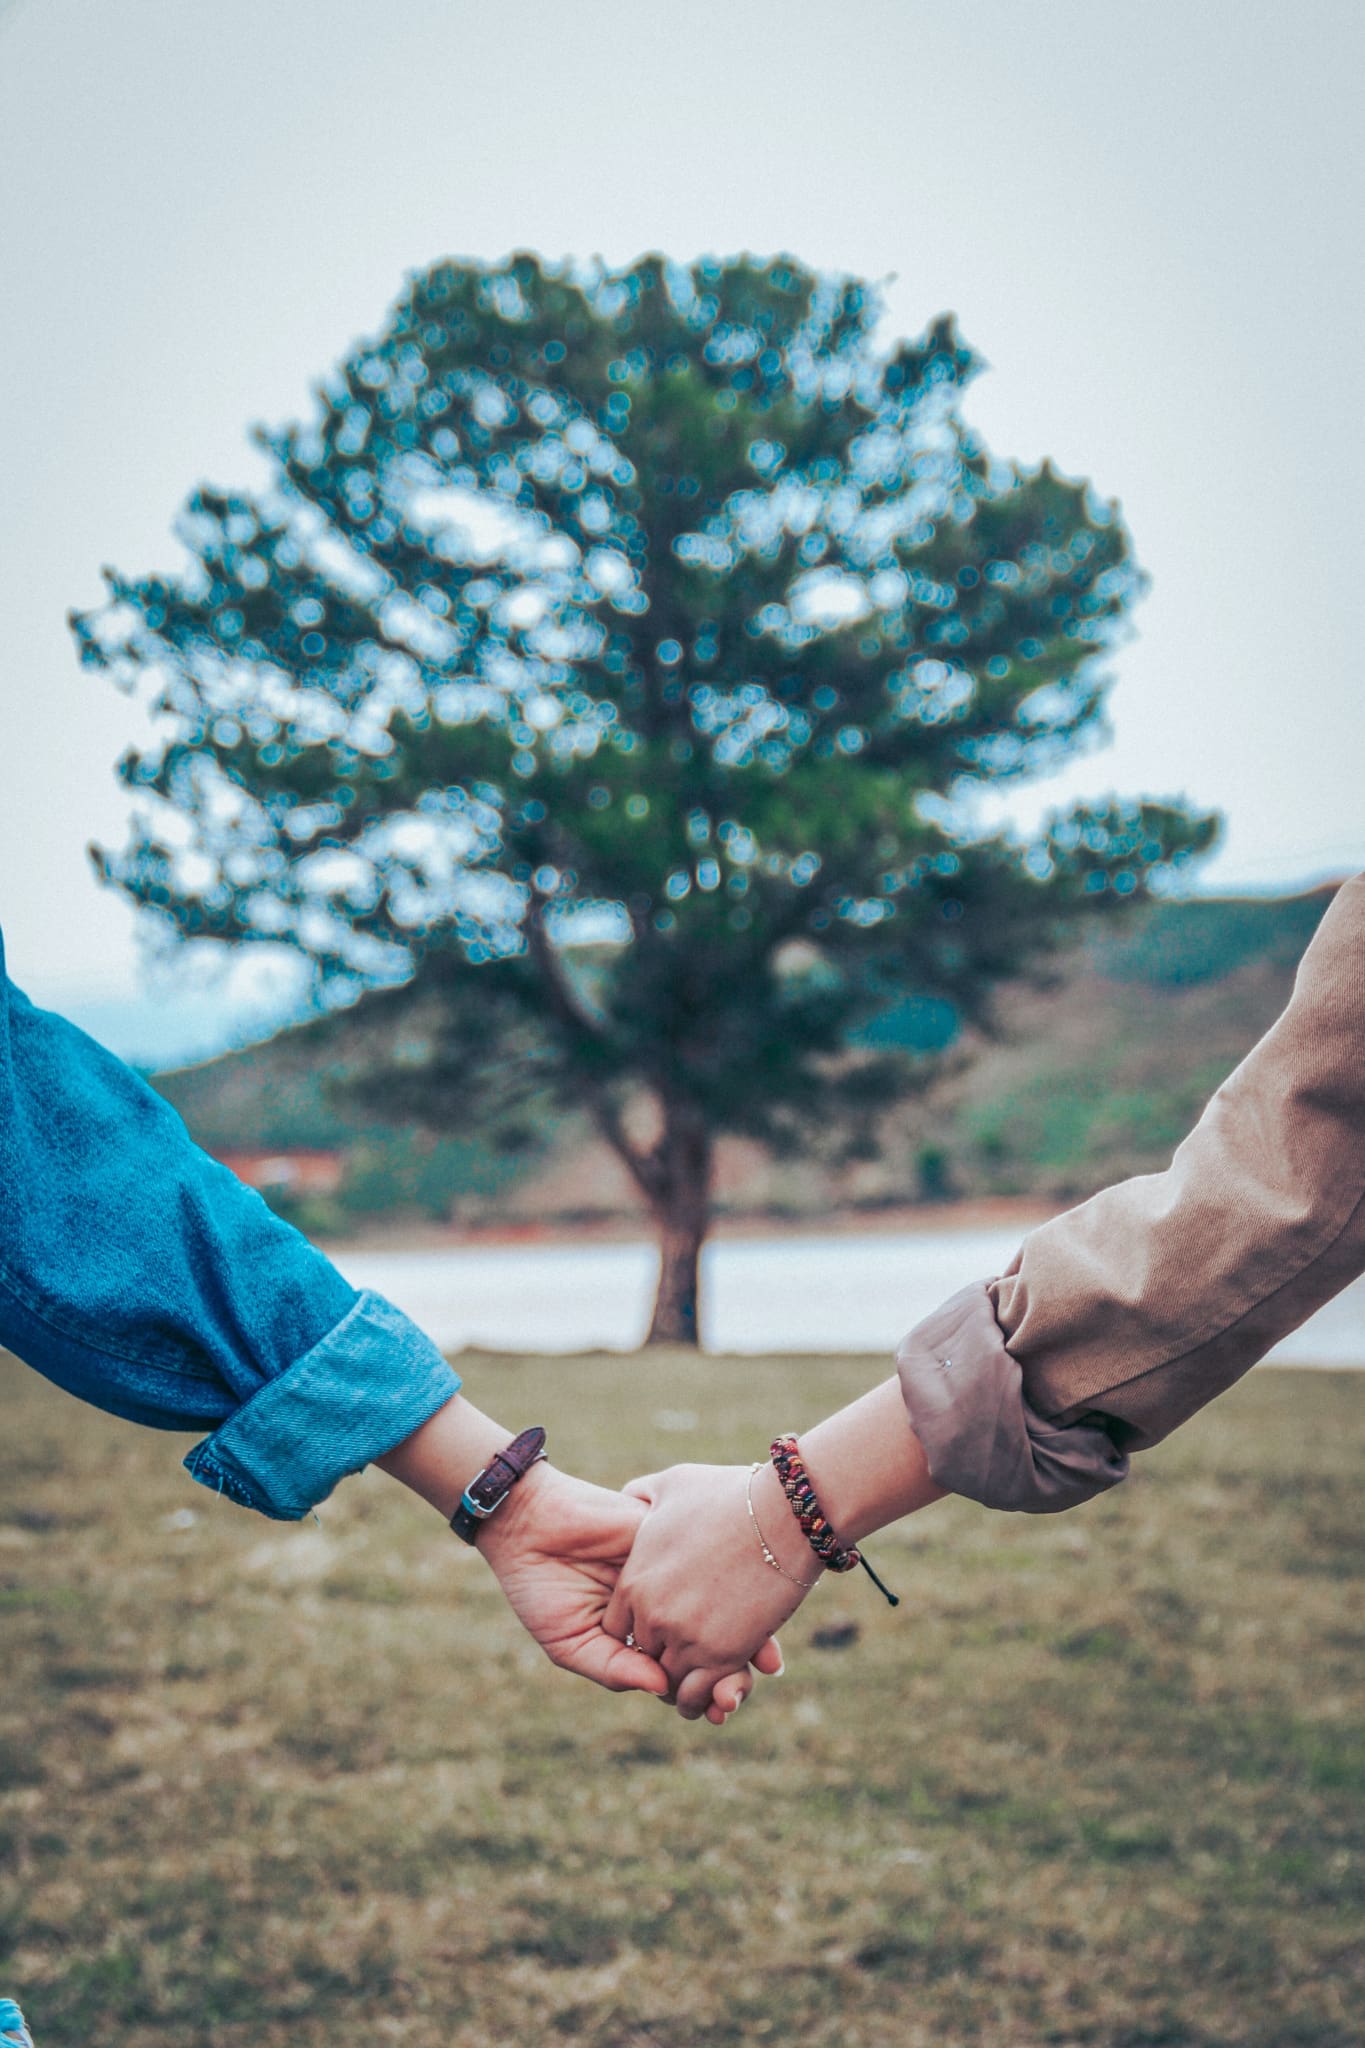 Conjugal Photo by Dương Hữu on Unsplash Couple holding hands in front of a tree.